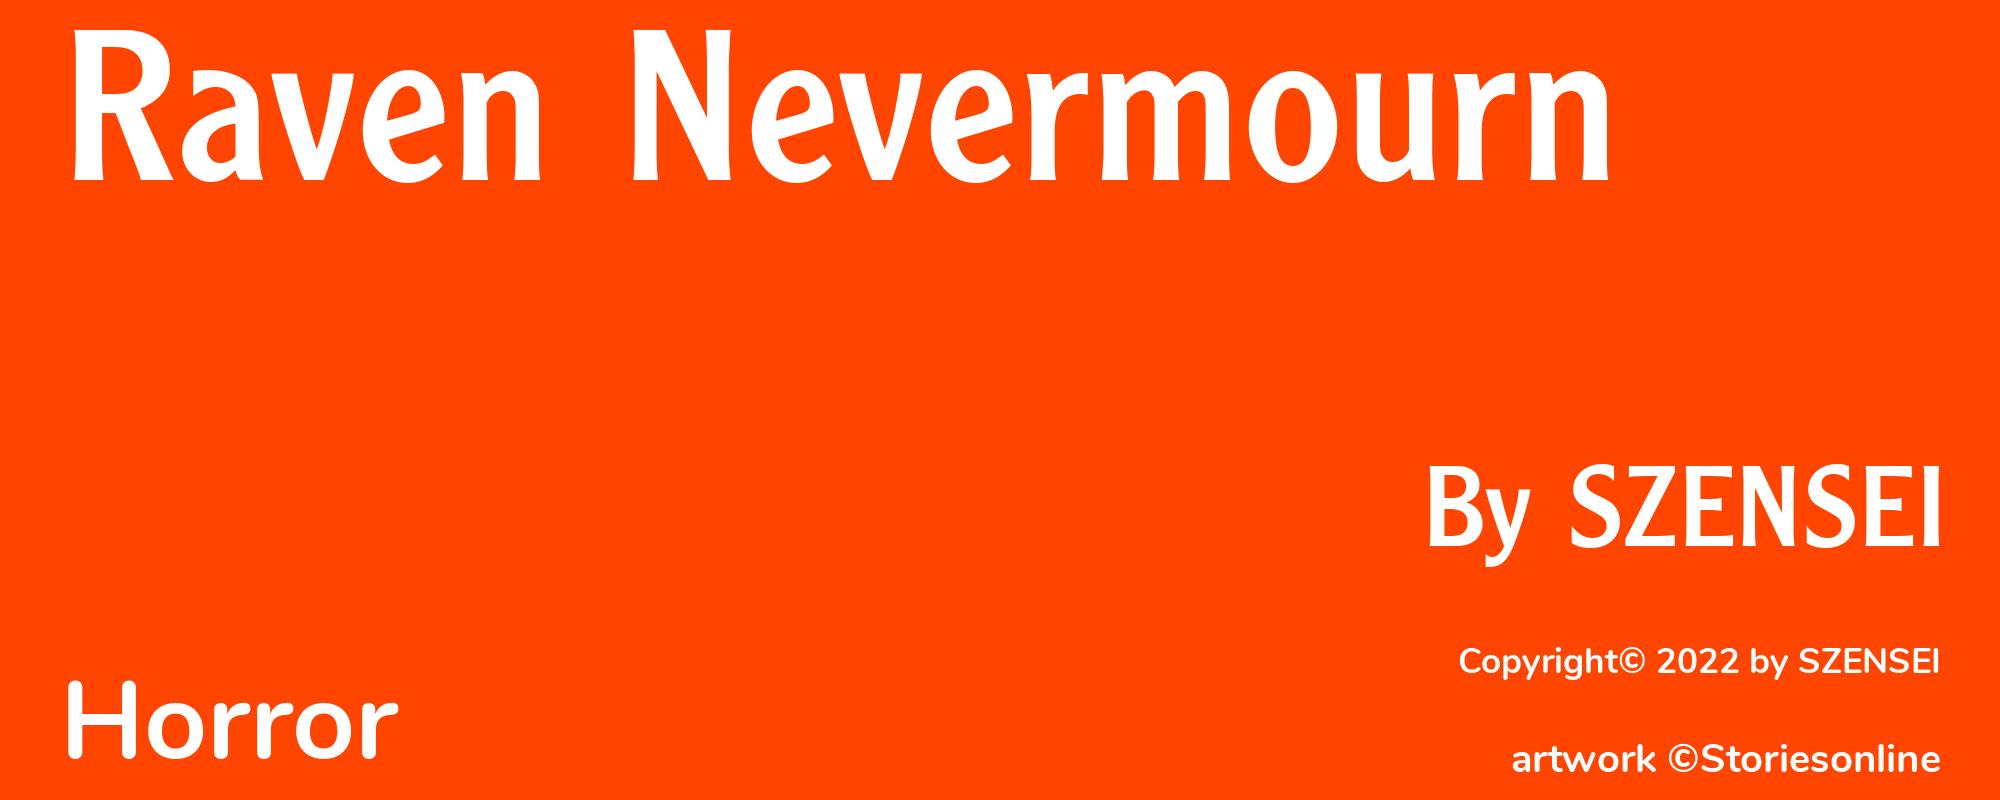 Raven Nevermourn - Cover